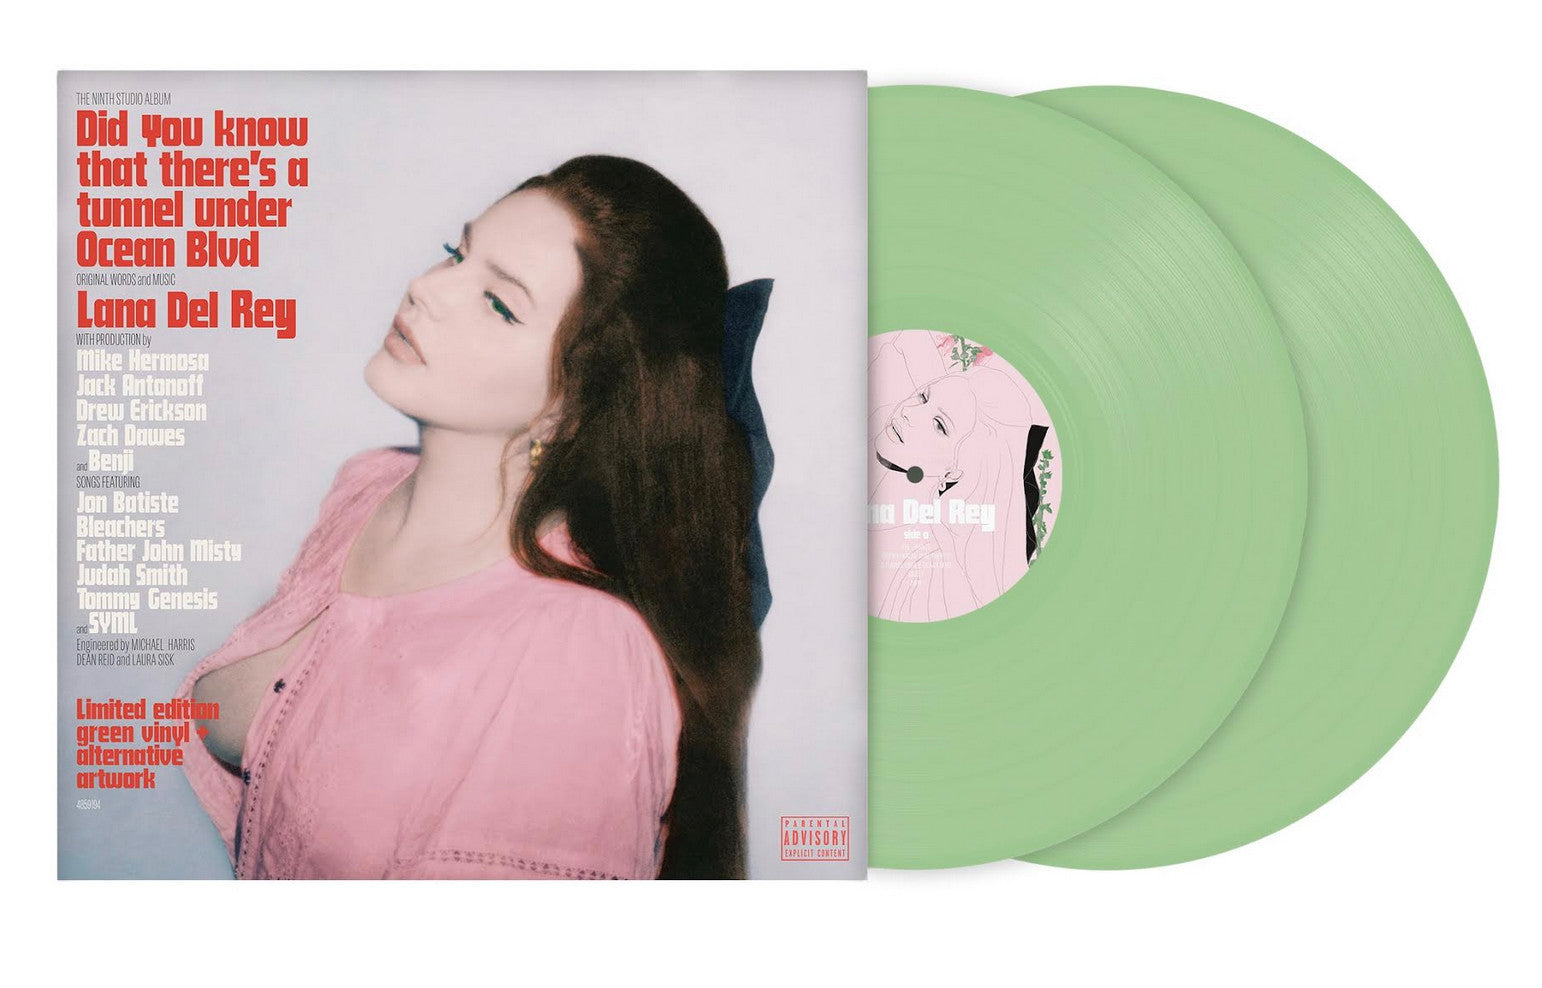 Lana Del Rey- Did You Know That There’s A Tunnel Under Ocean Blvd [Light Green 2LP/Alt. Cover] (Indie Exclusive) (PREORDER) - Darkside Records